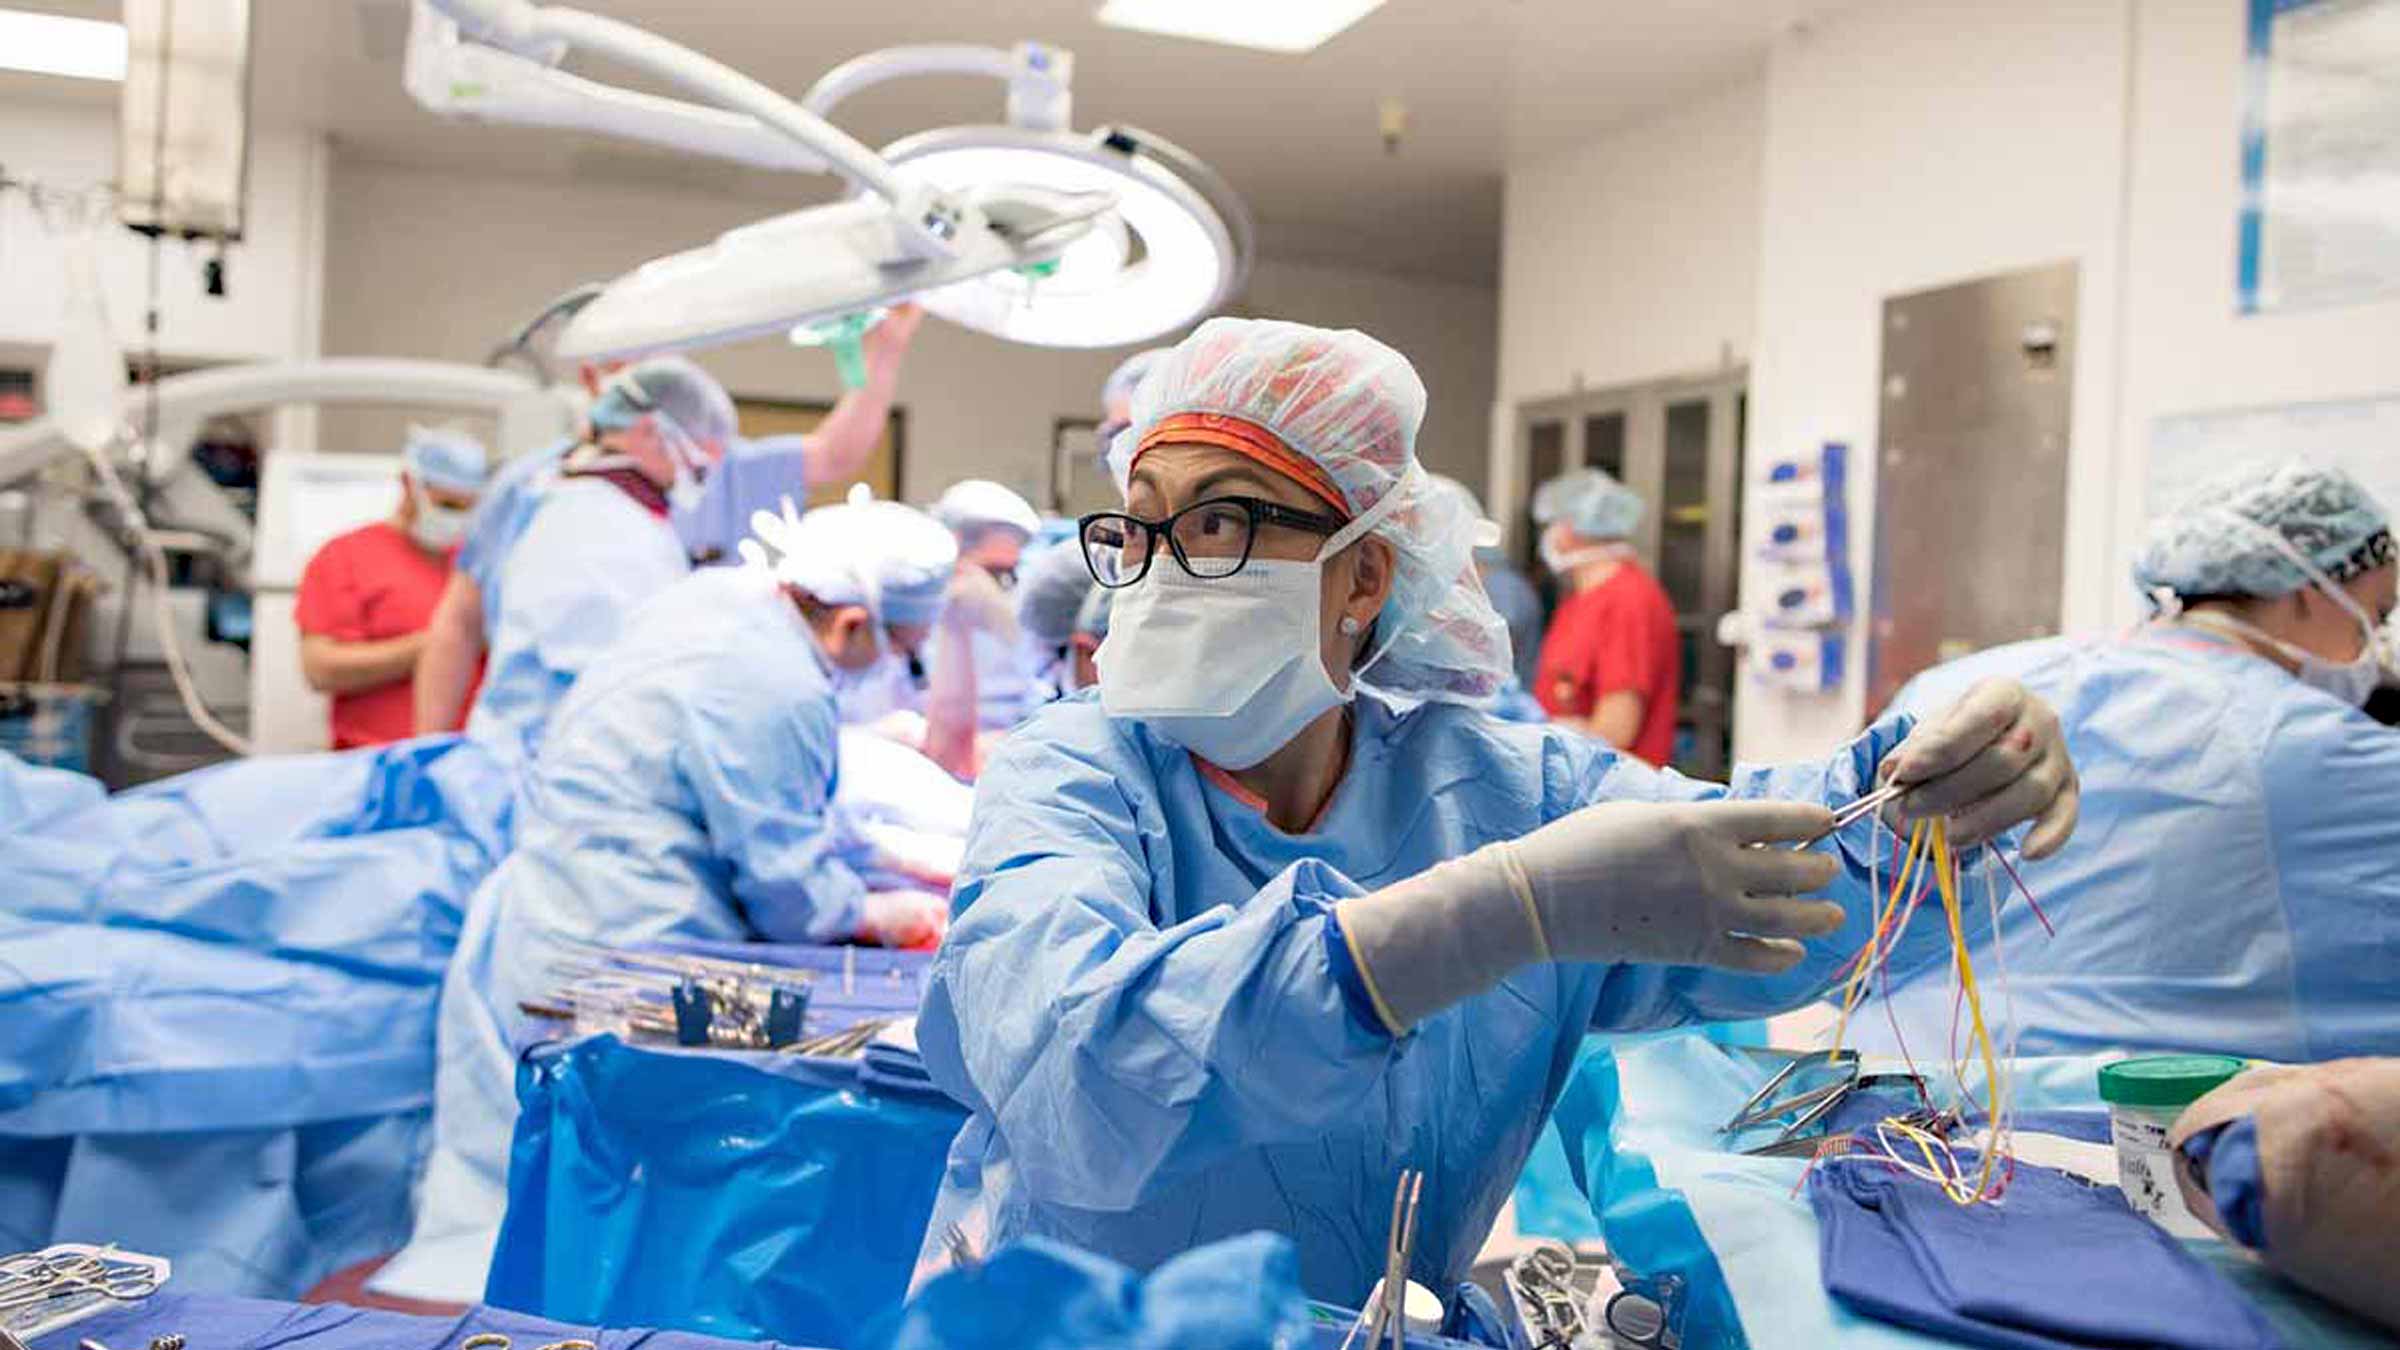 Surgeons preparing for emergency surgery in operation room